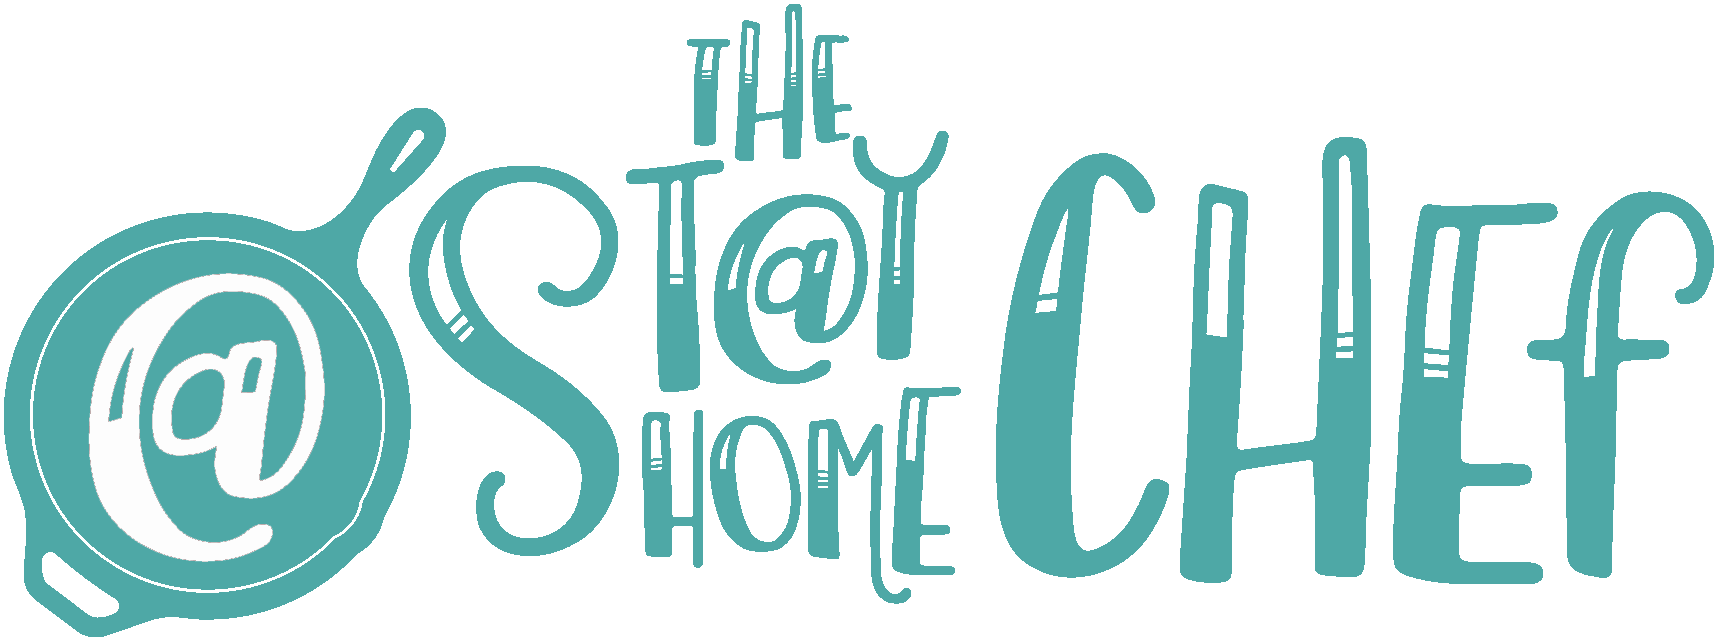 /public/the-stay-at-home-chef-logo.webp